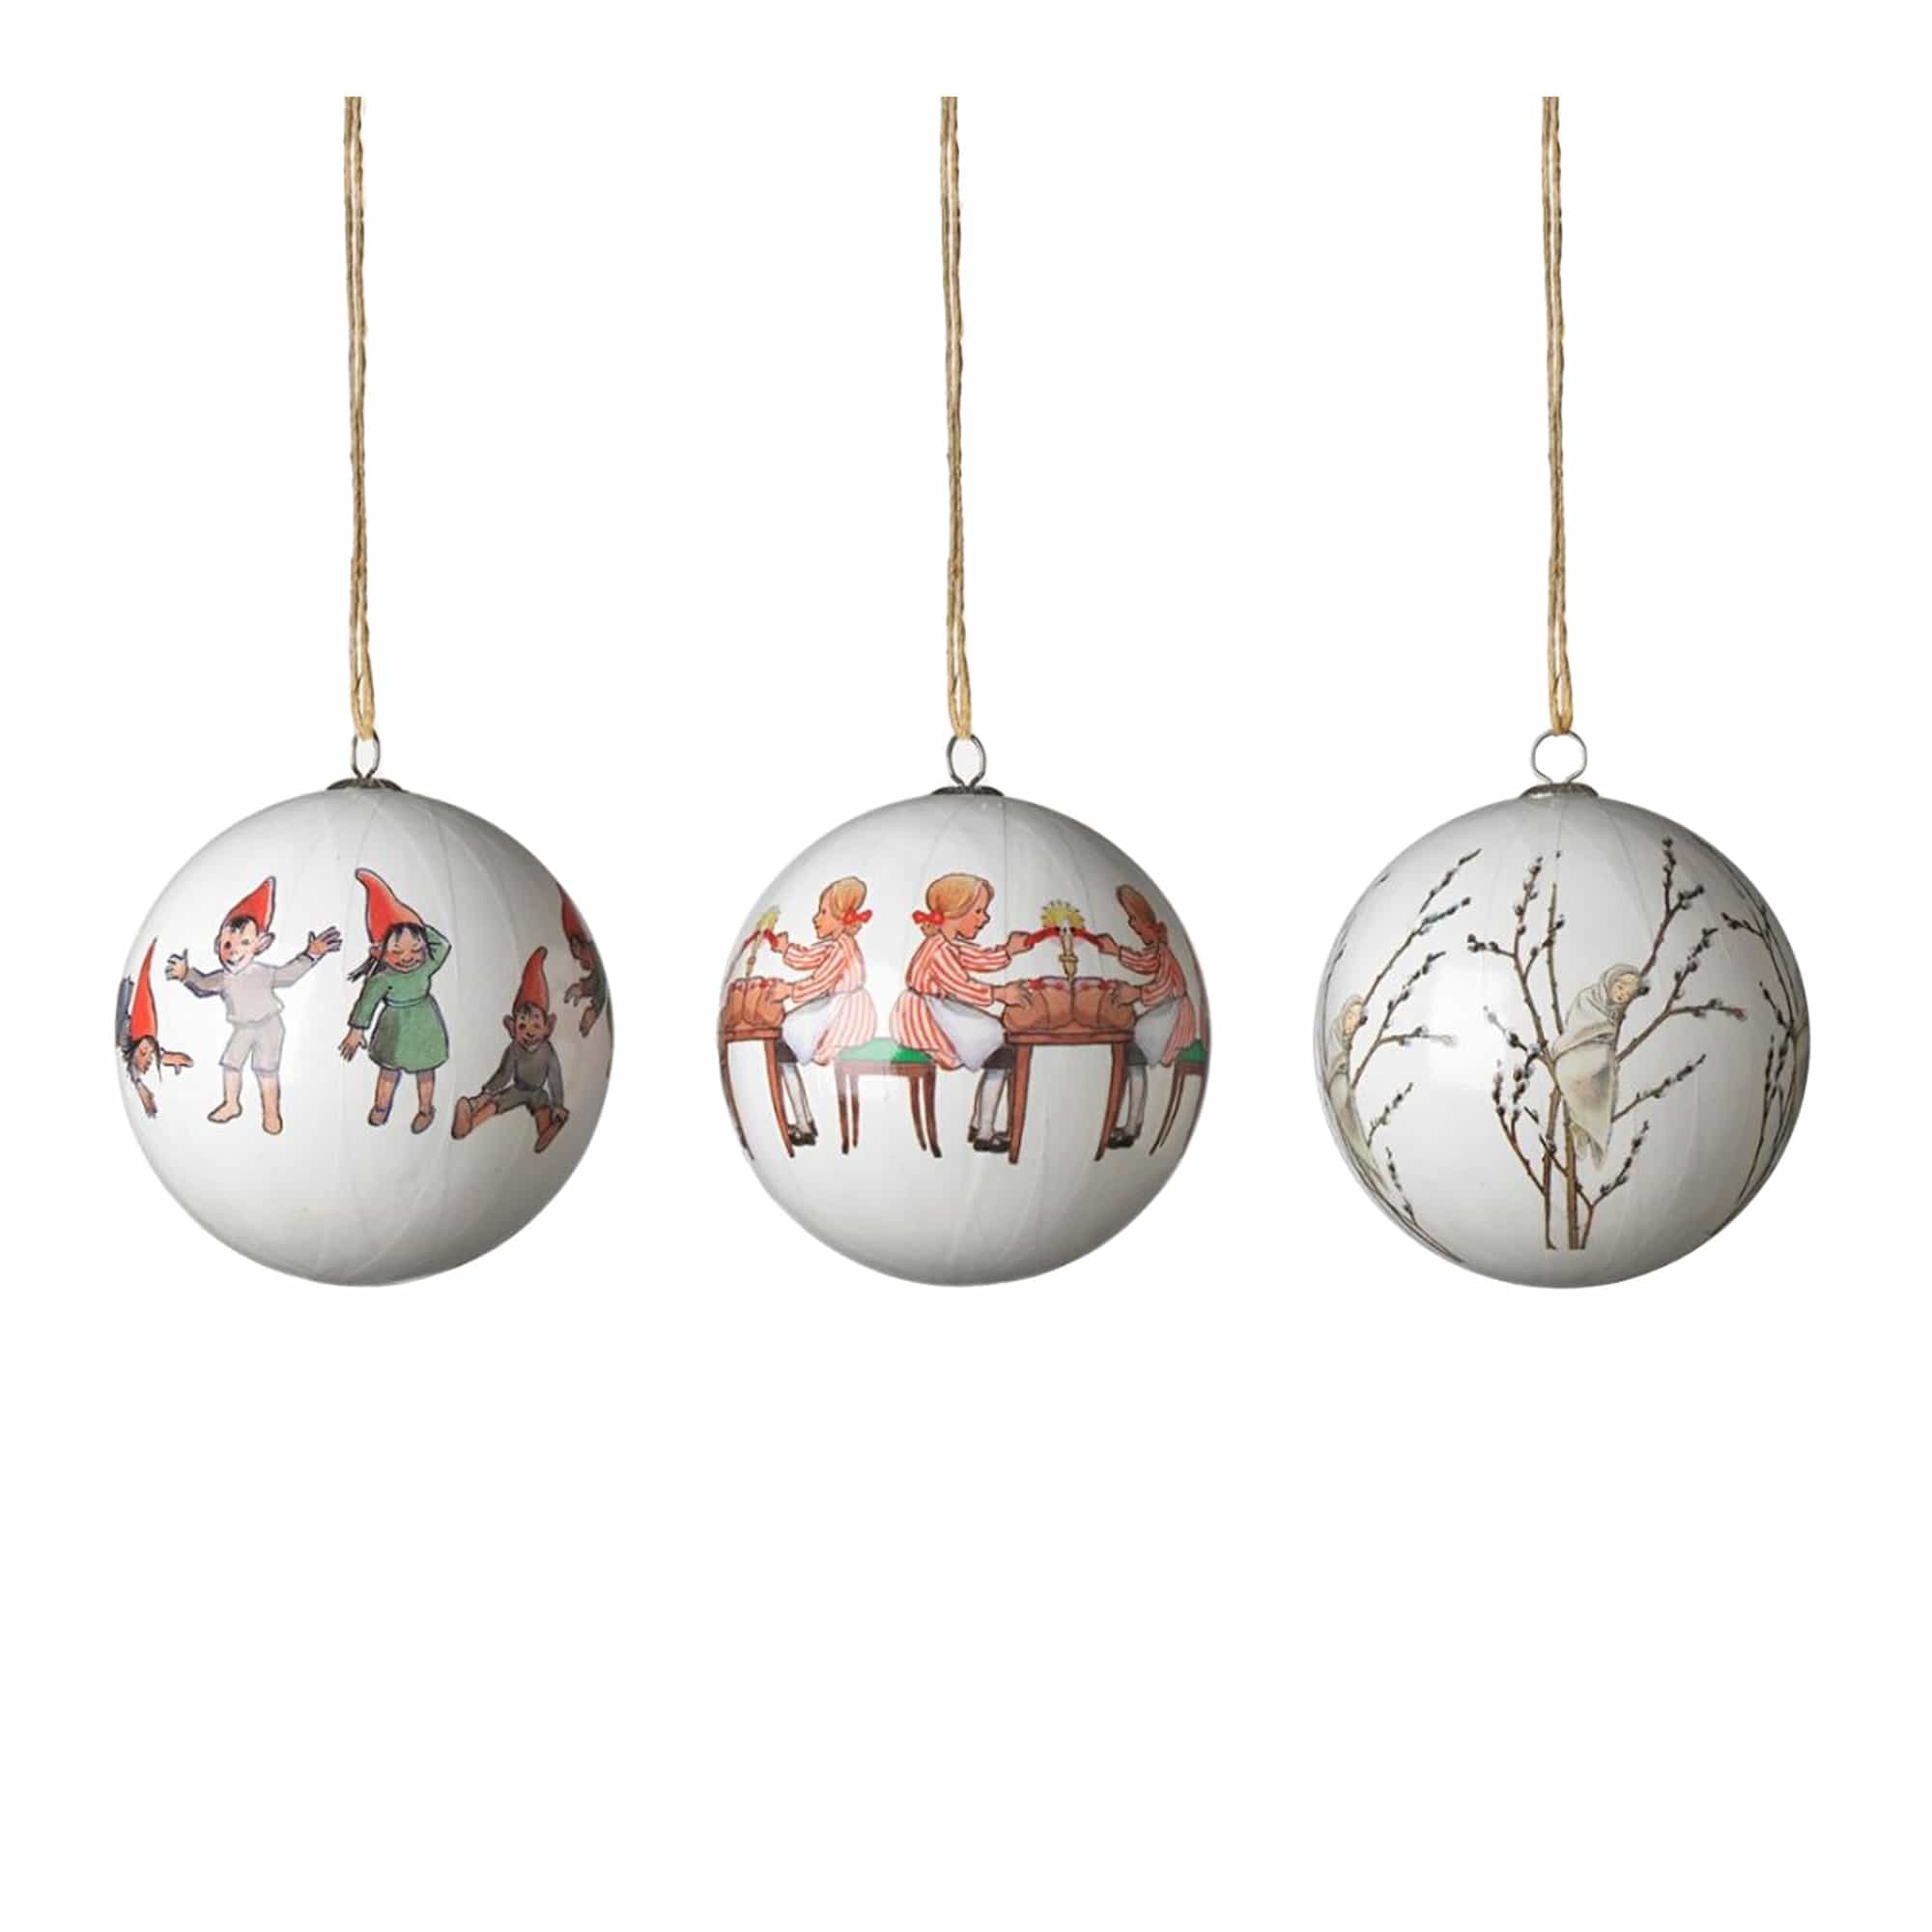 Elsa Beskow Christmas Tree Ornaments, Set of 3, Little Willow & Co